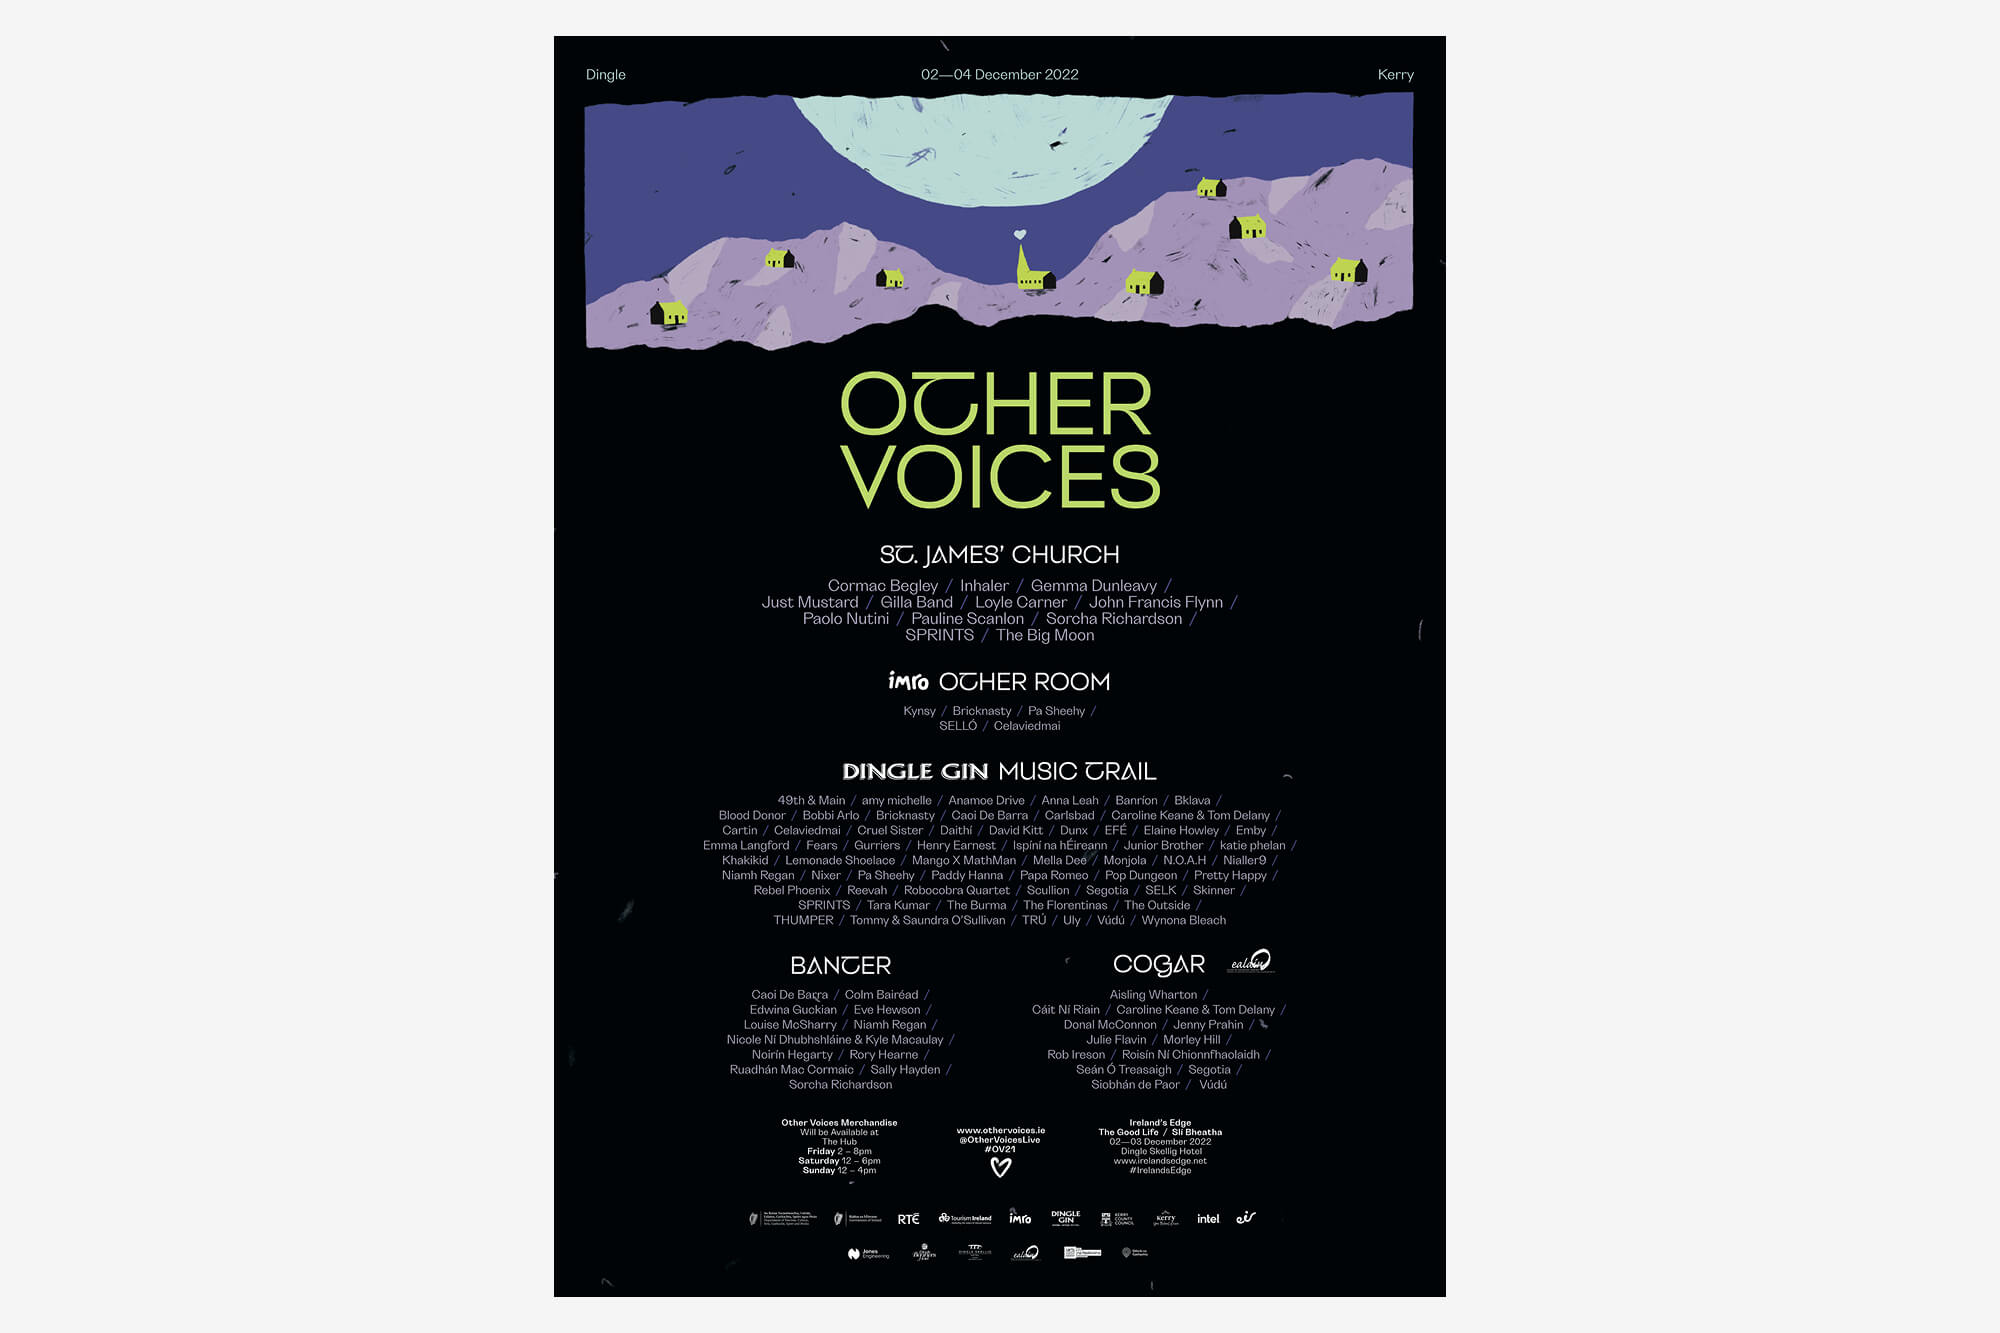 OTHER VOICES